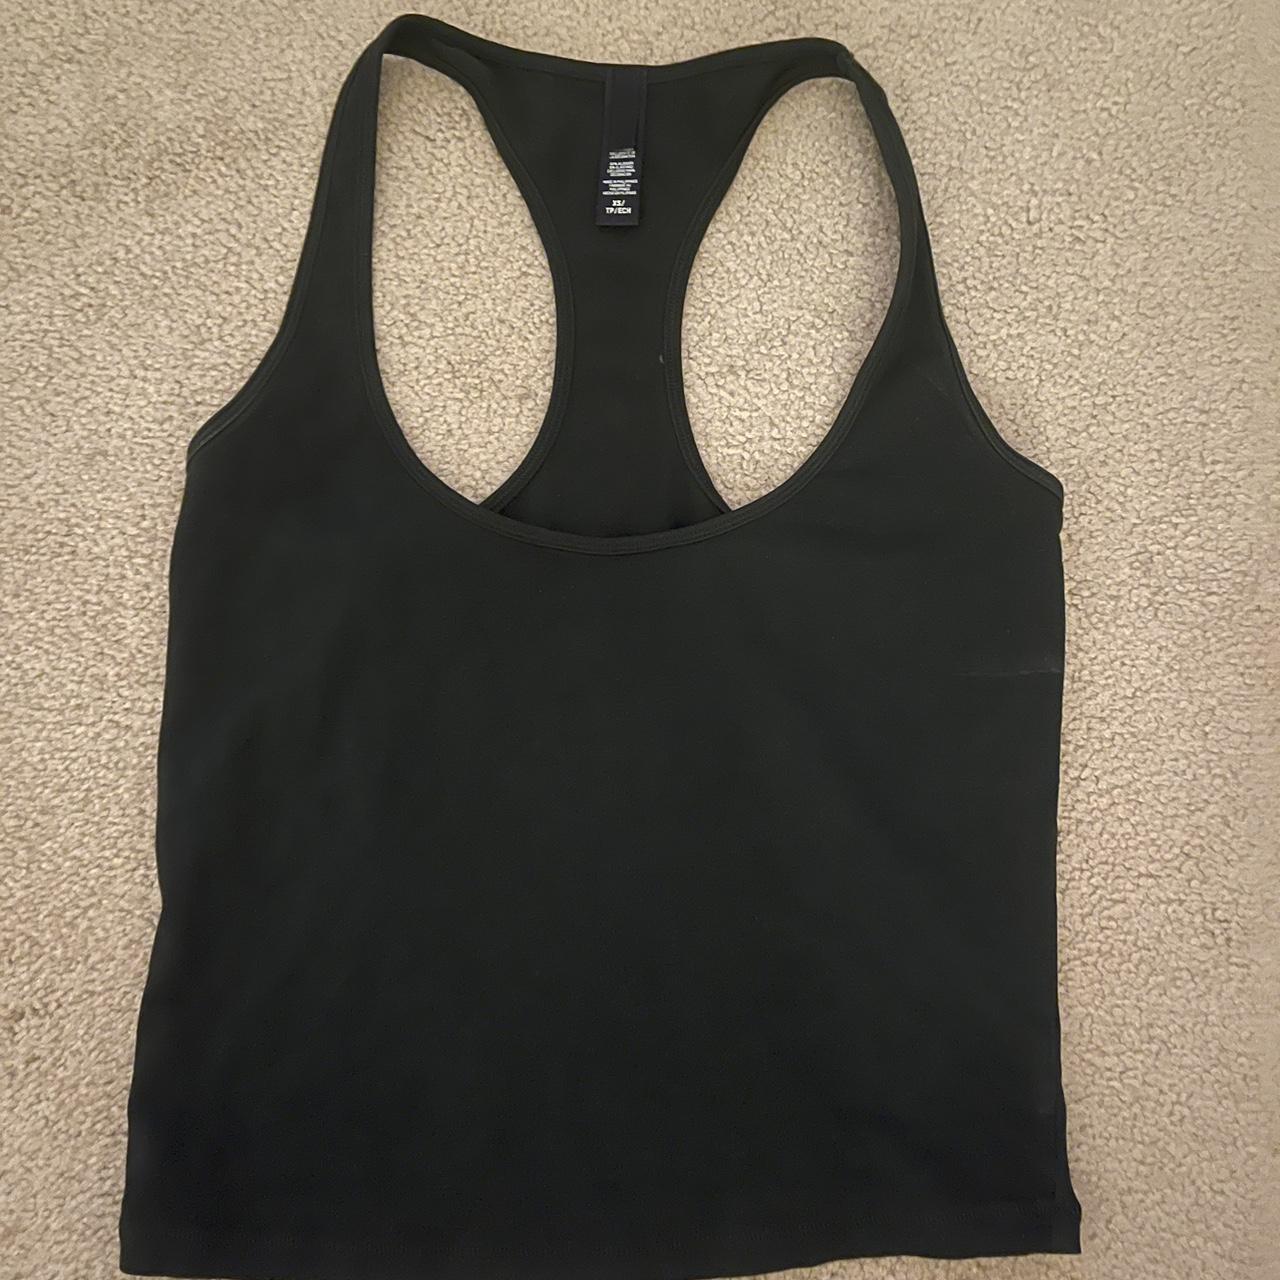 Skims tank In onyx (I took the tags off but I have... - Depop